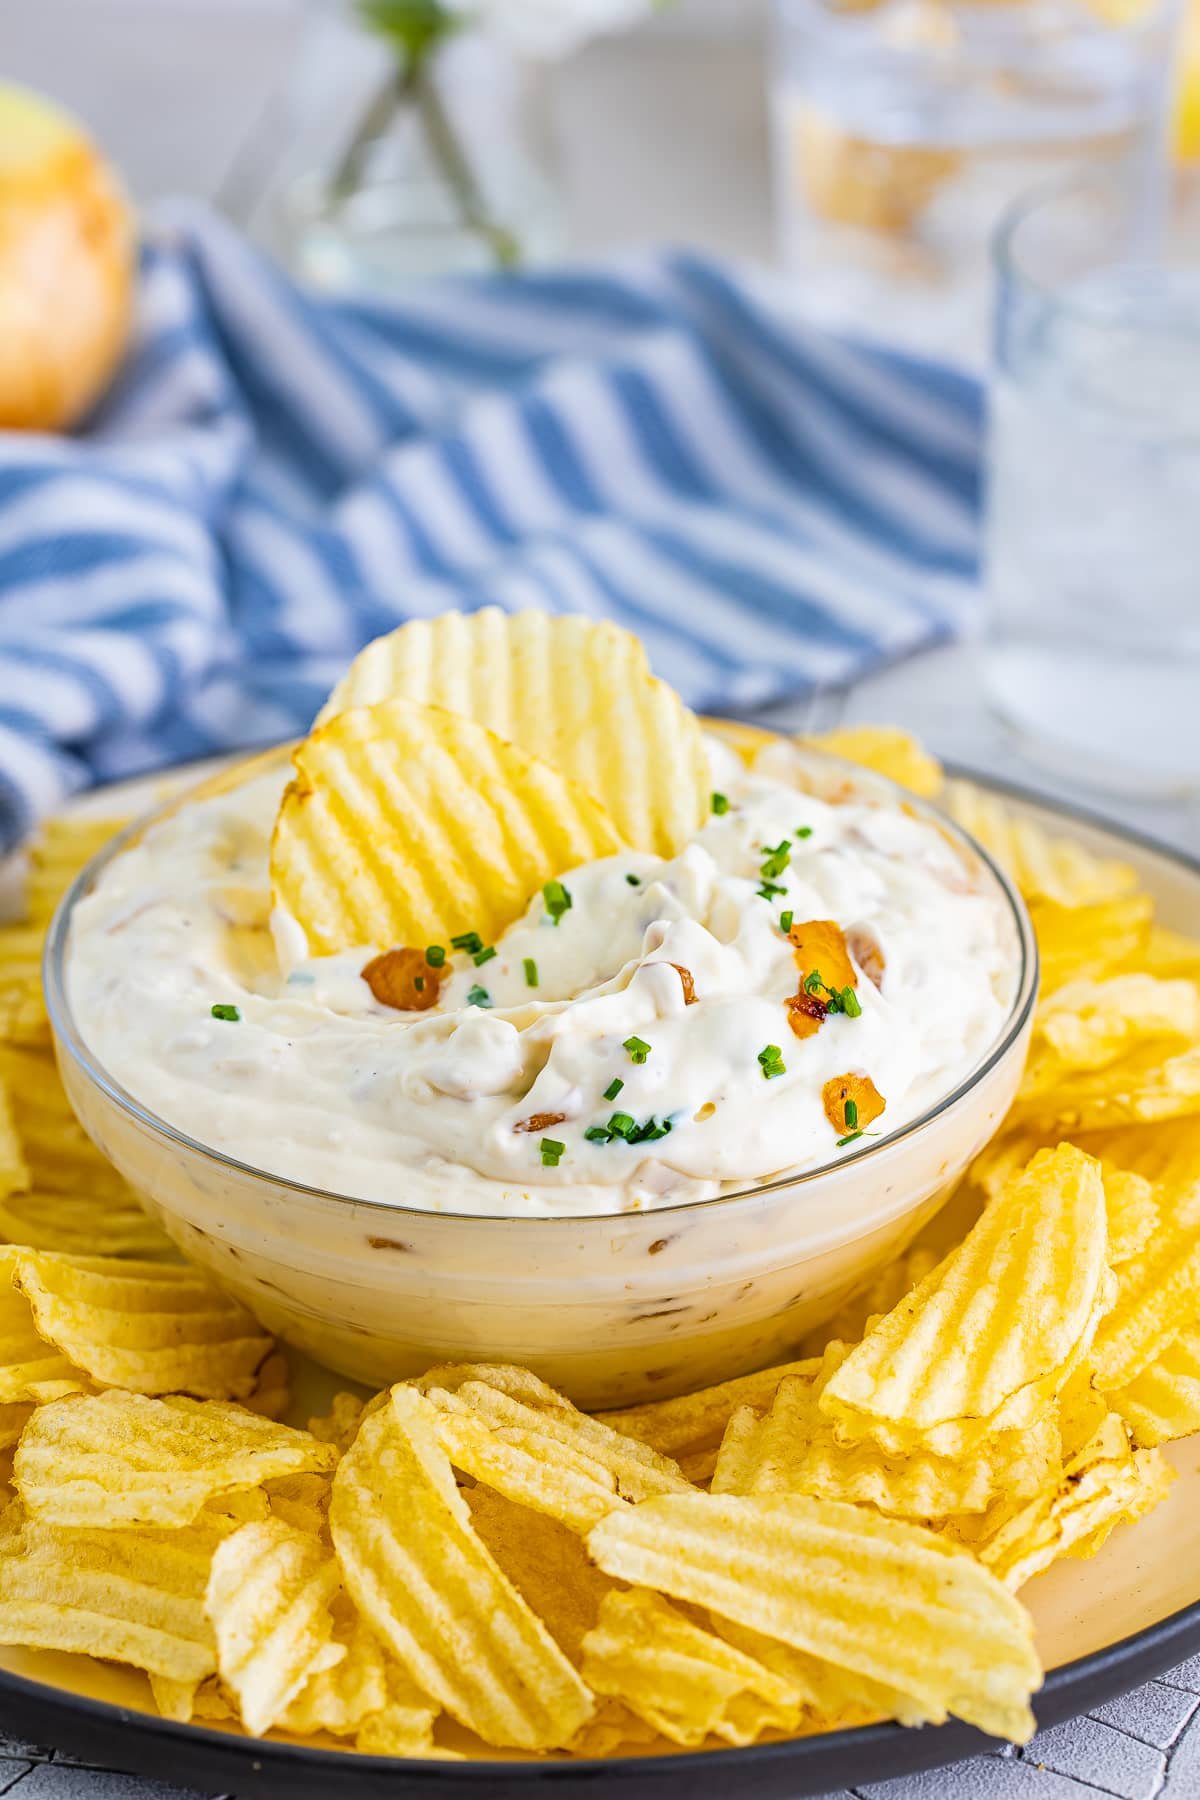 French onion dip recipe in a clear glass bowl with two wavy potato chips sticking out of it. Blue striped linen and glasses of ice water in the background